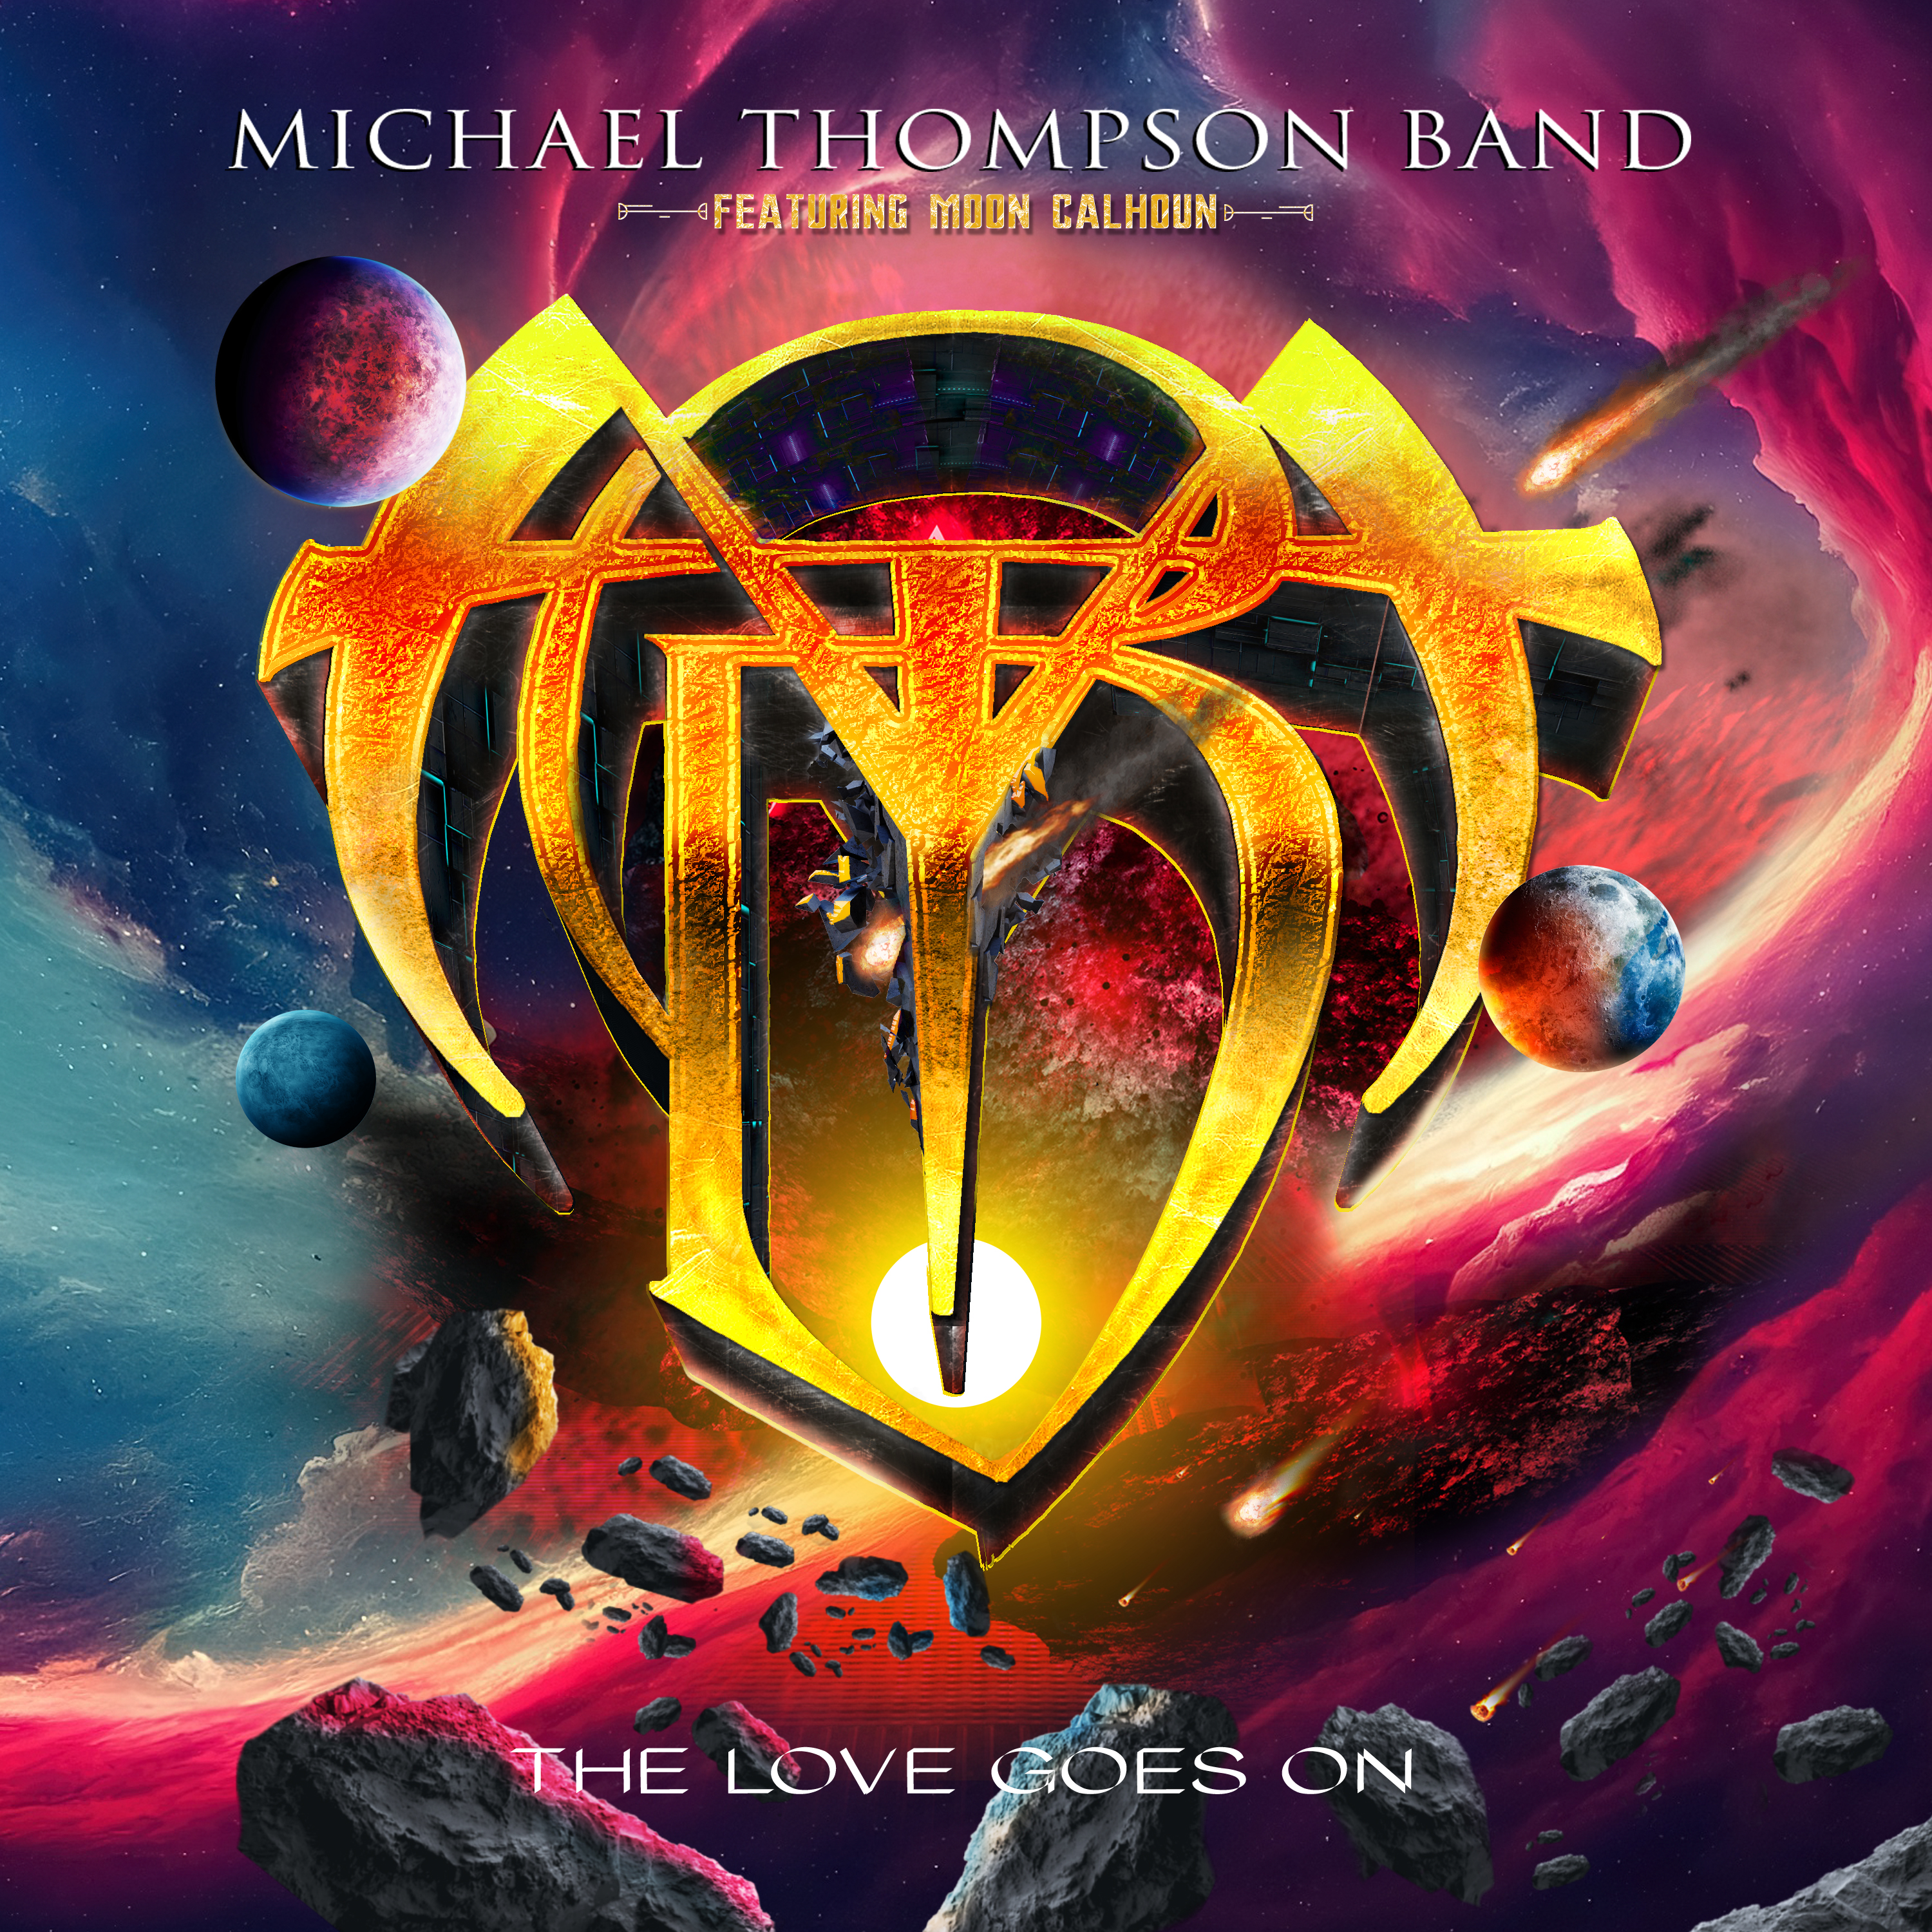 Michael Thompson Band - The Love Goes On - CD